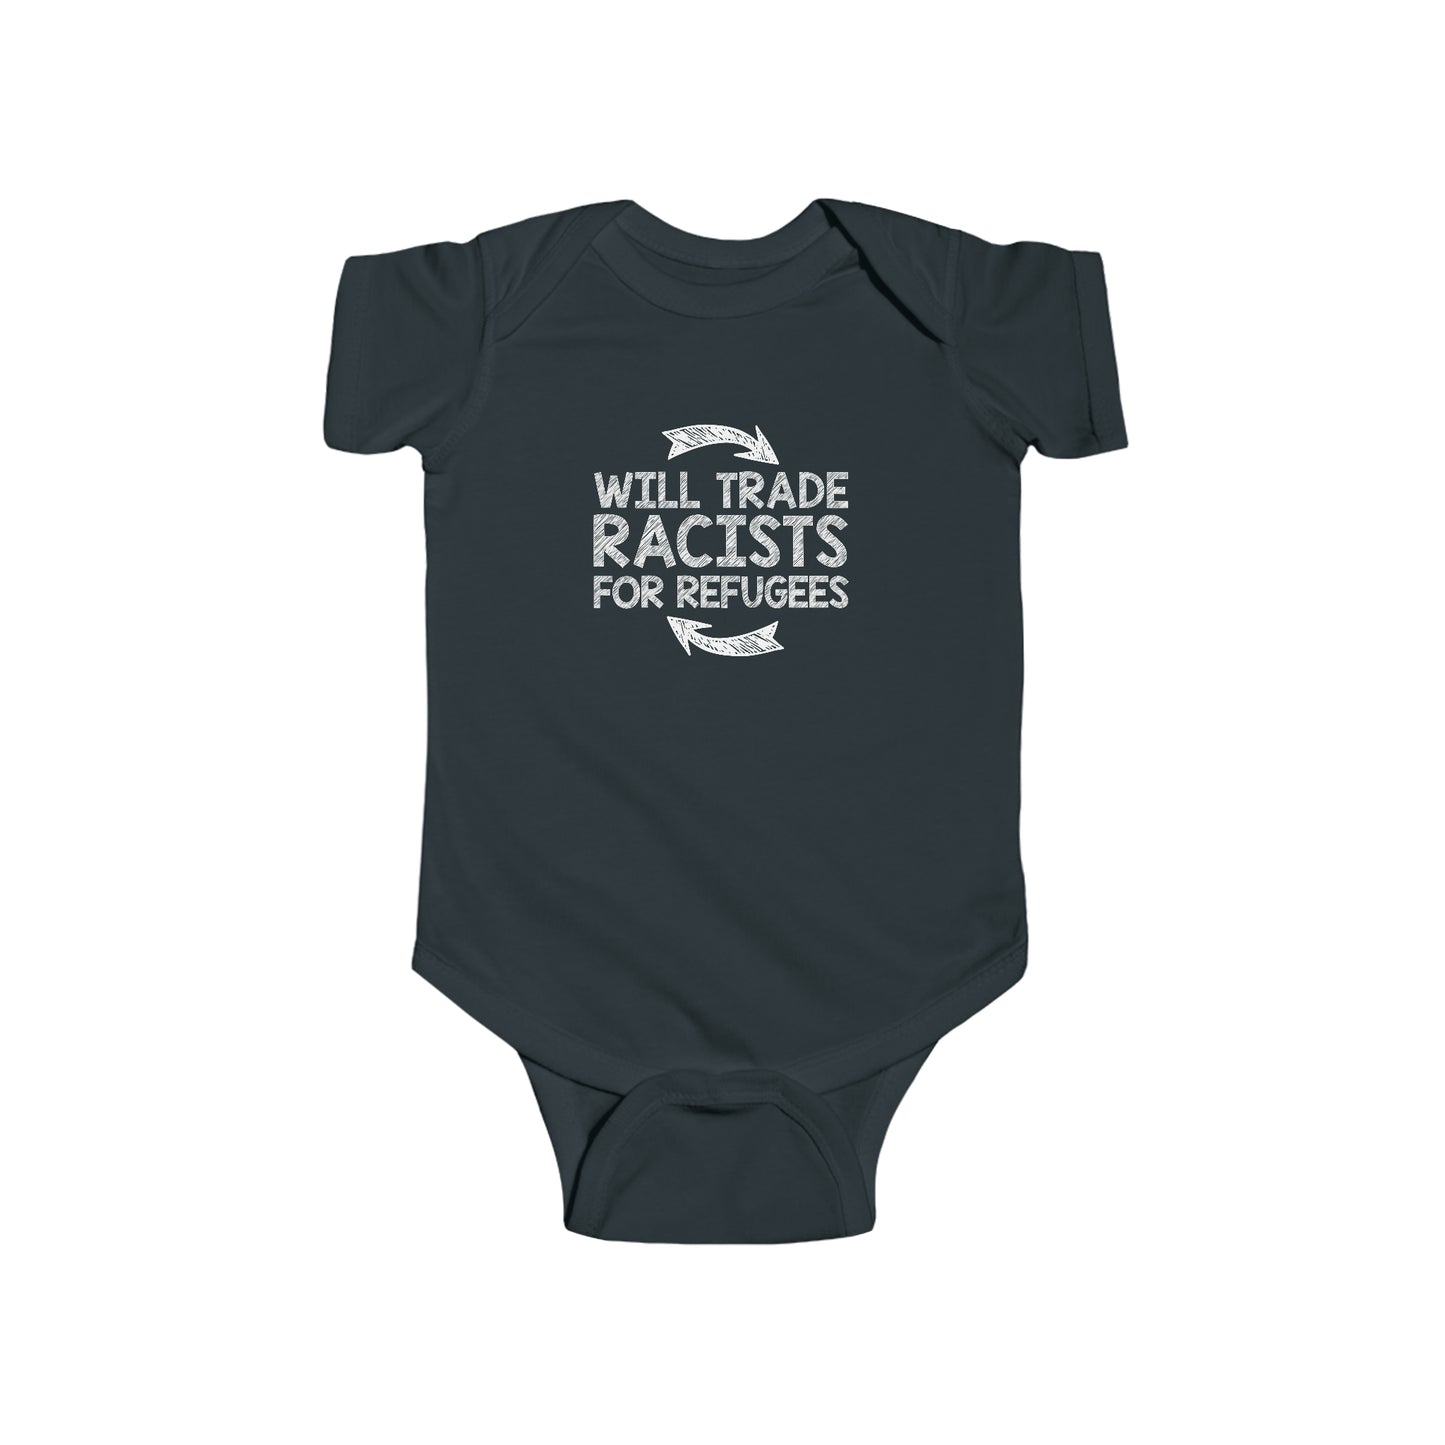 “Will Trade Racists for Refugees” Infant Onesie